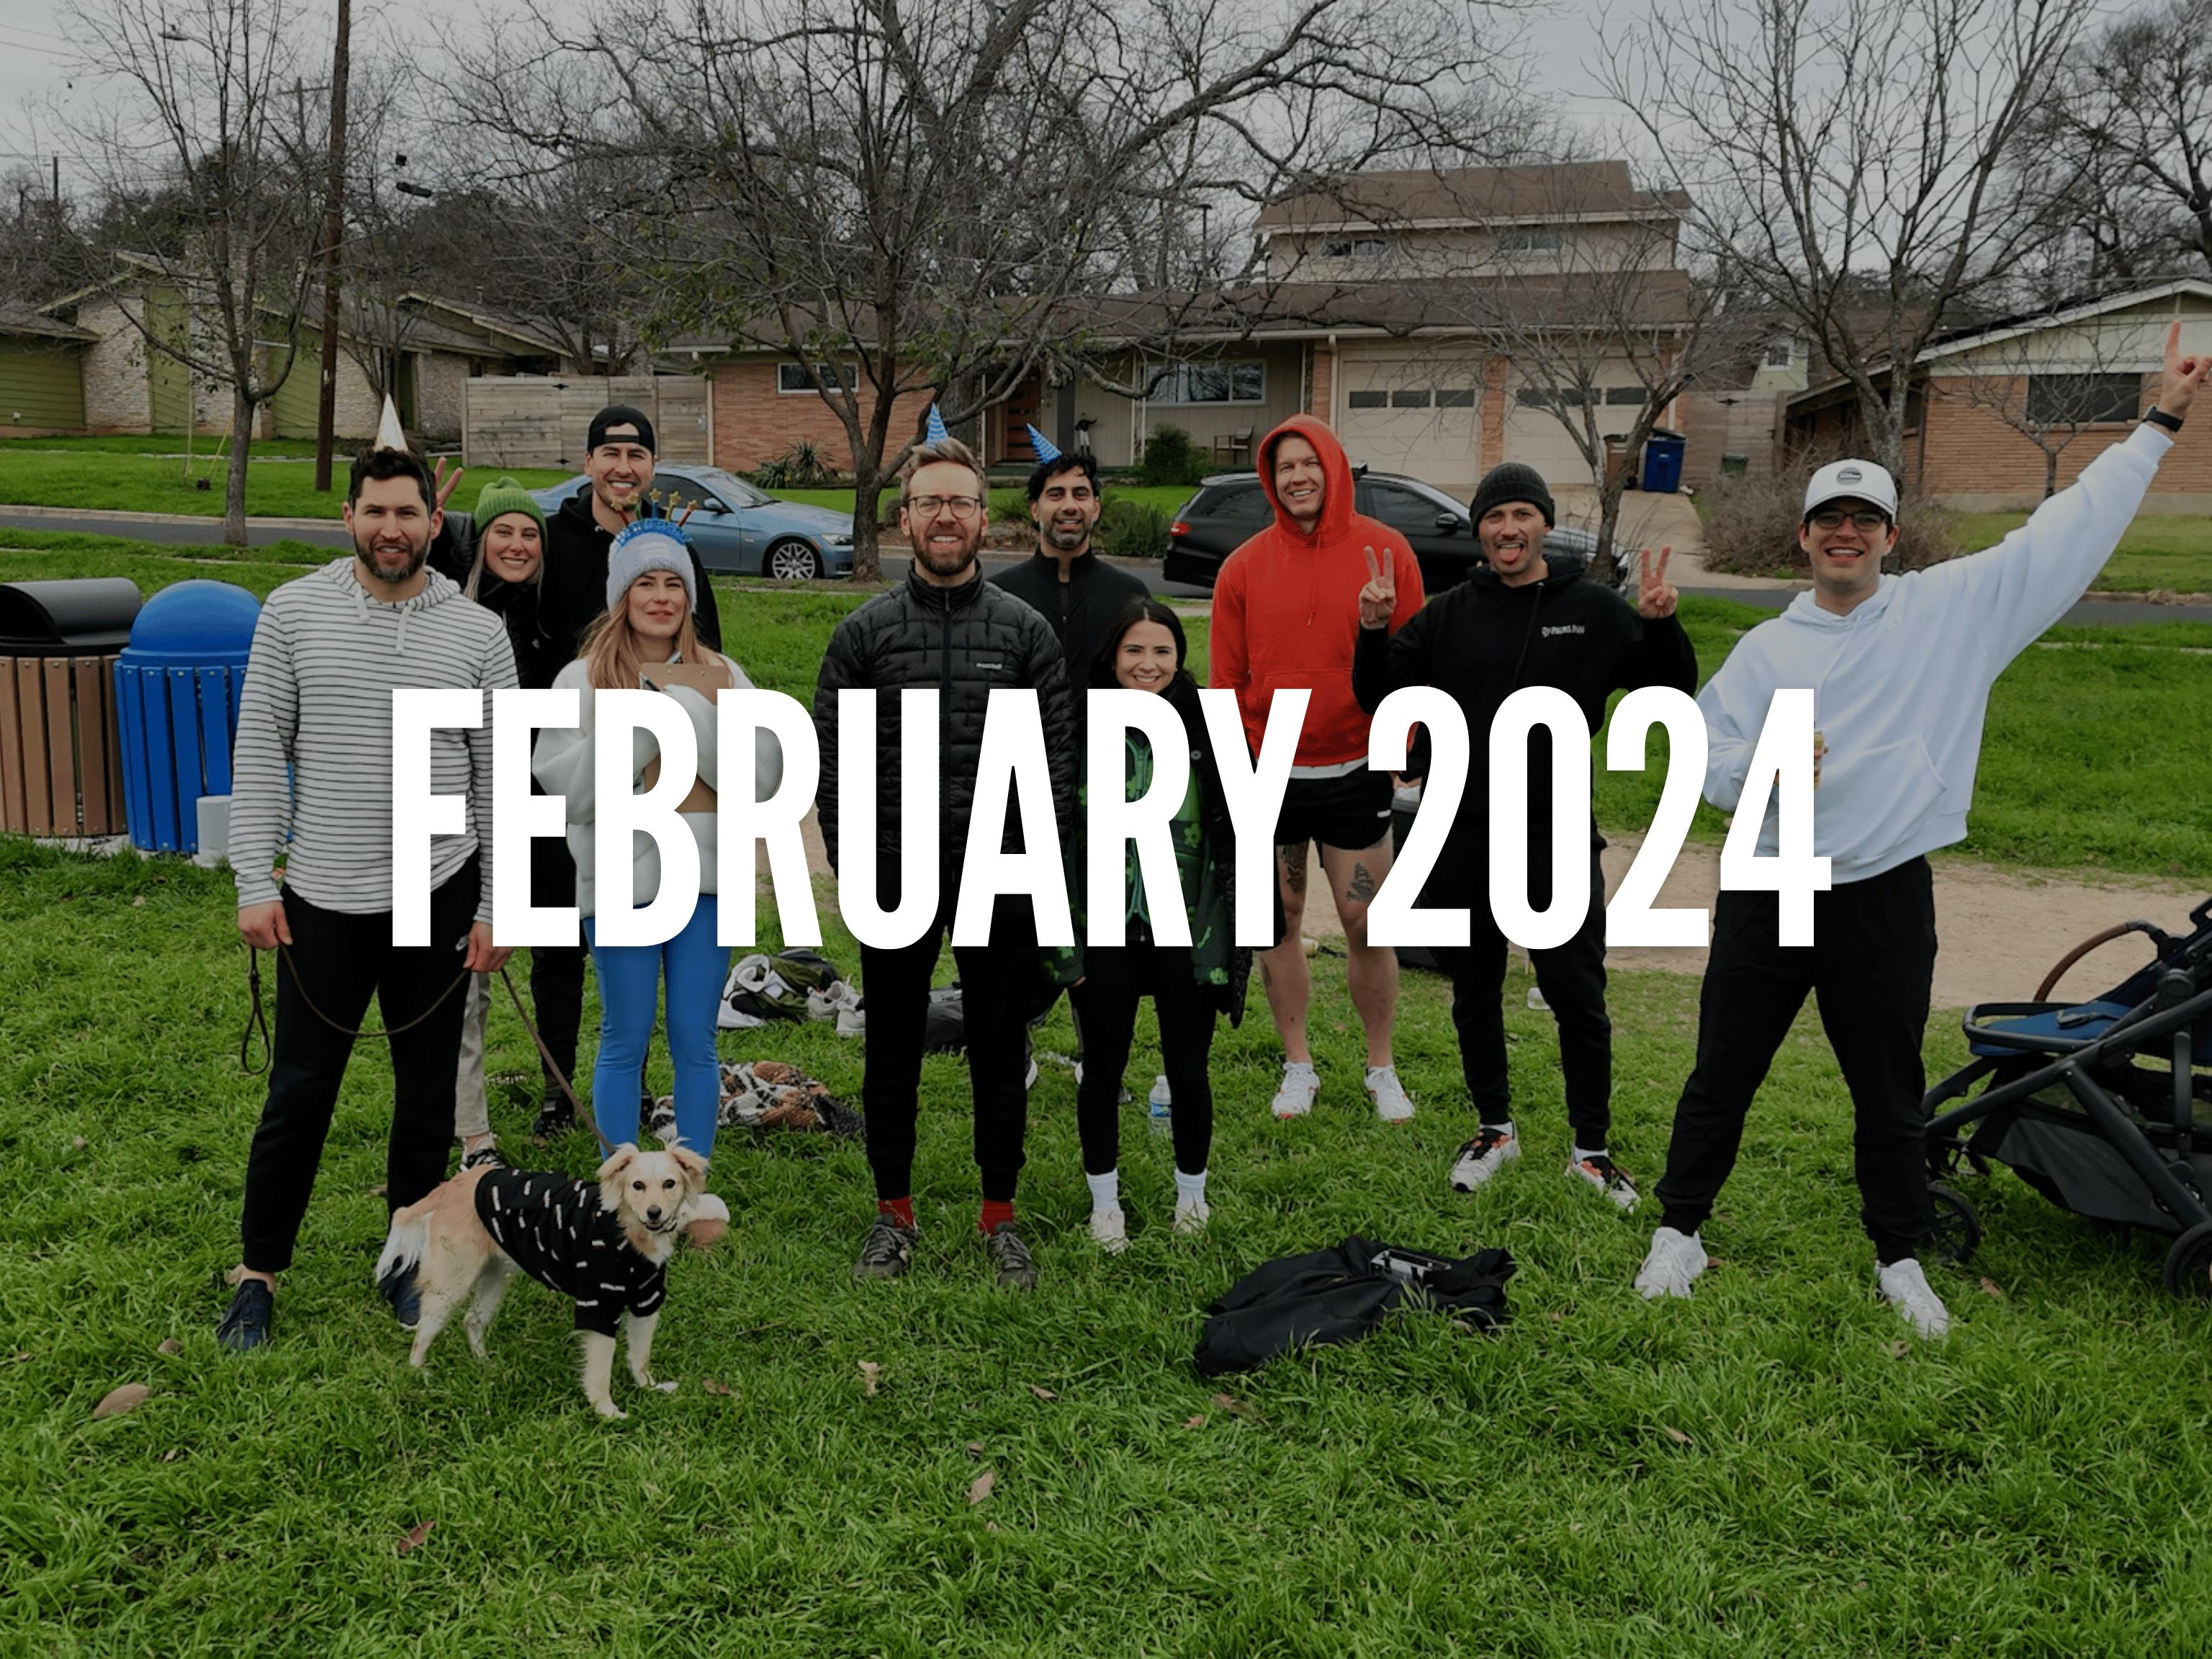 A group photo of Nick and his friends with a text in the middle saying February 2024